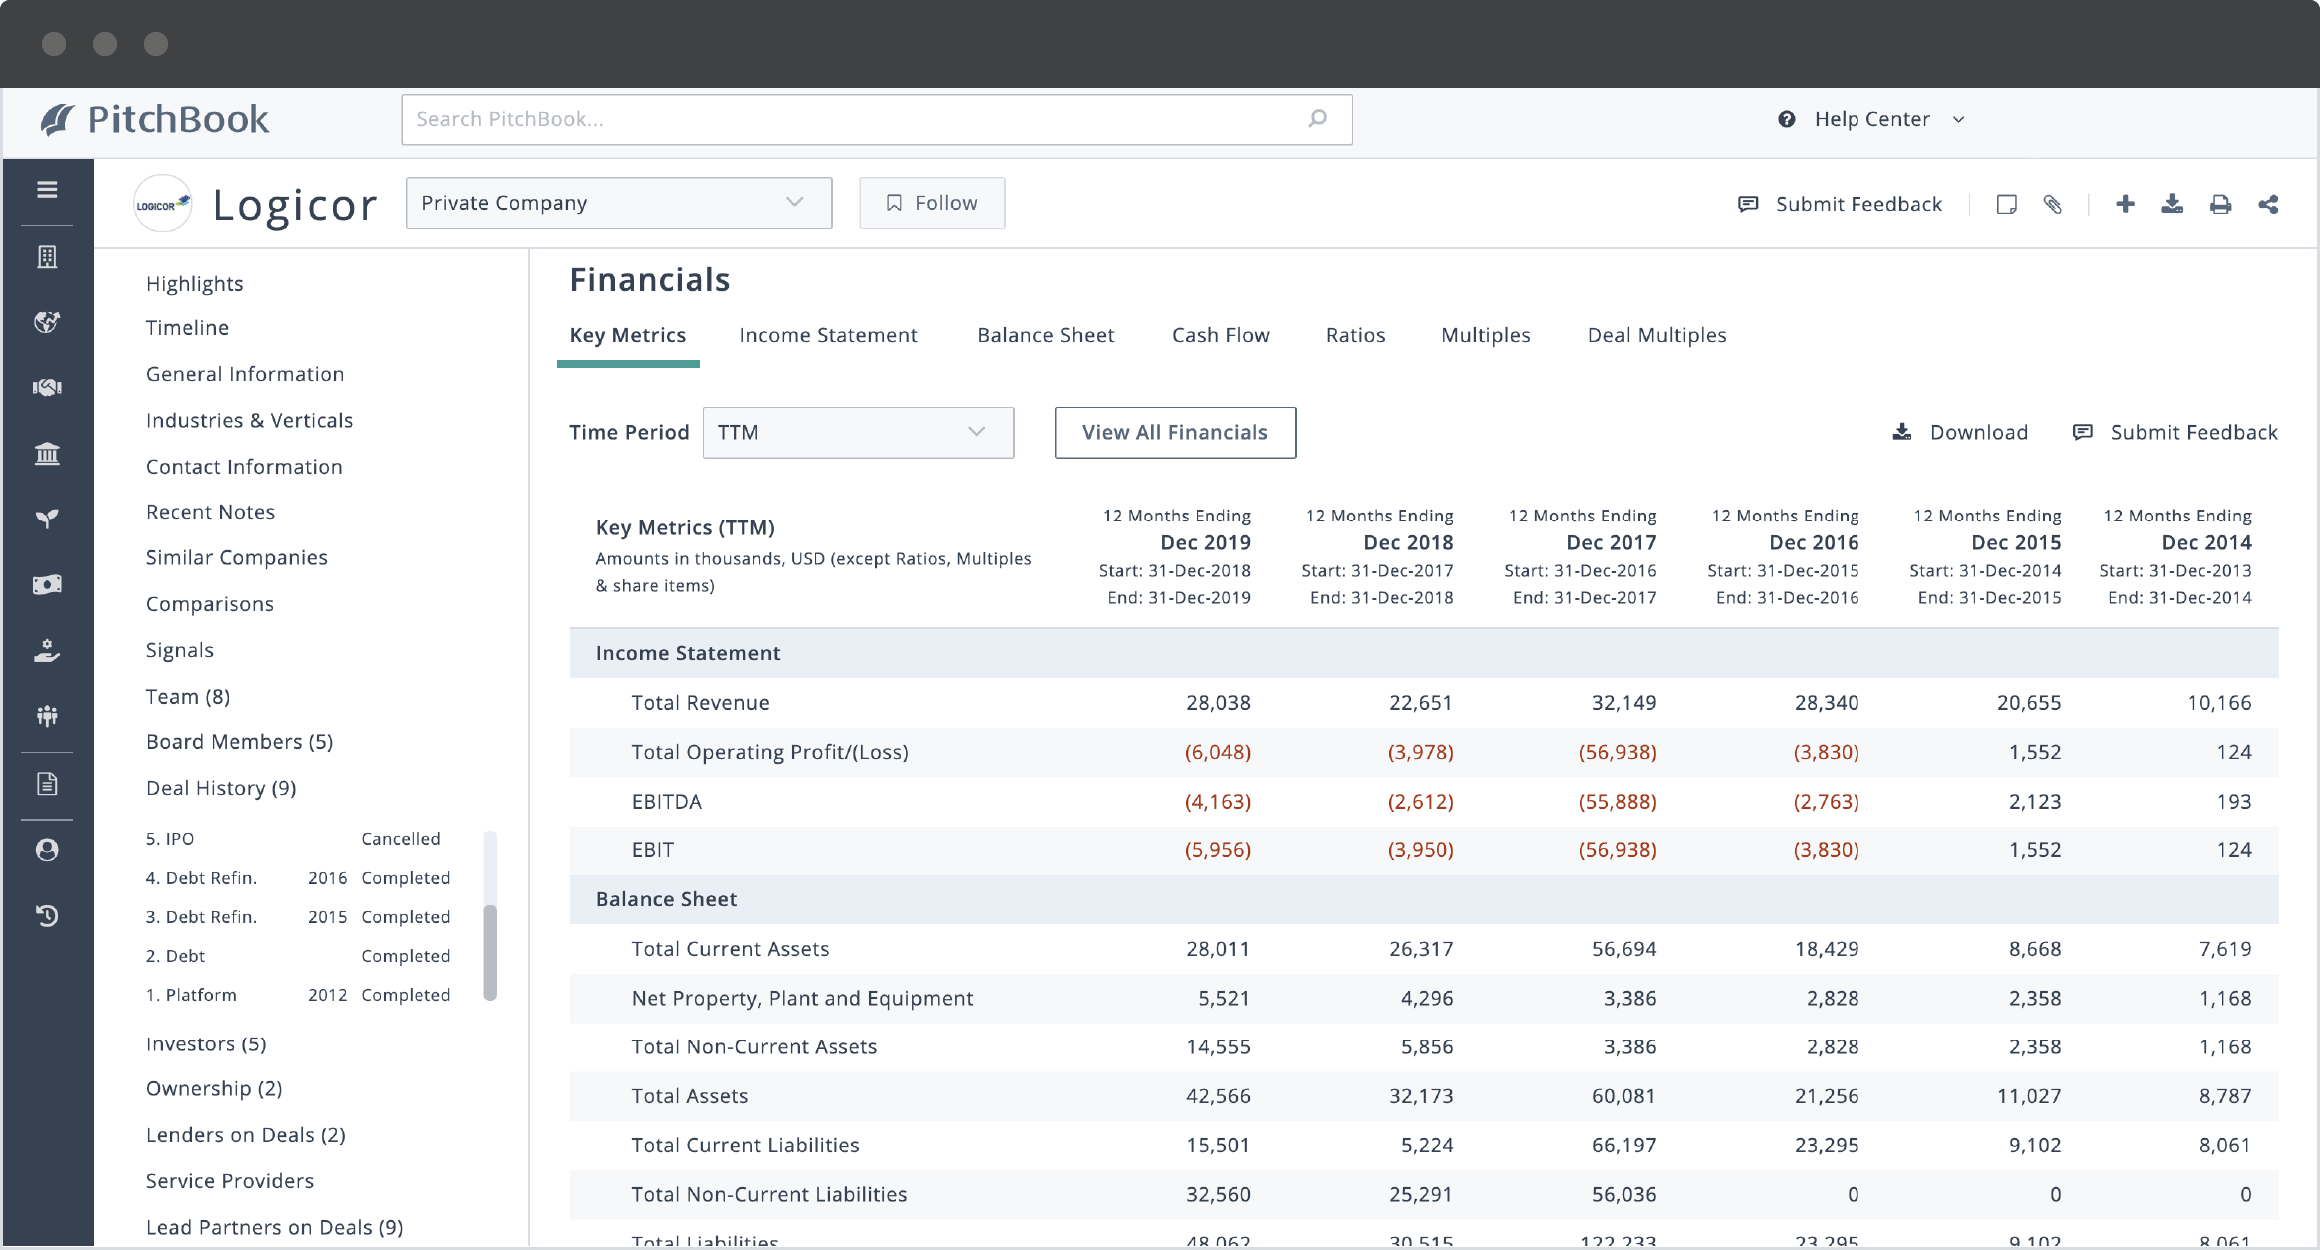 PitchBook company profile showing Logicor’s income statements and balance sheets from 2014 to 2019.